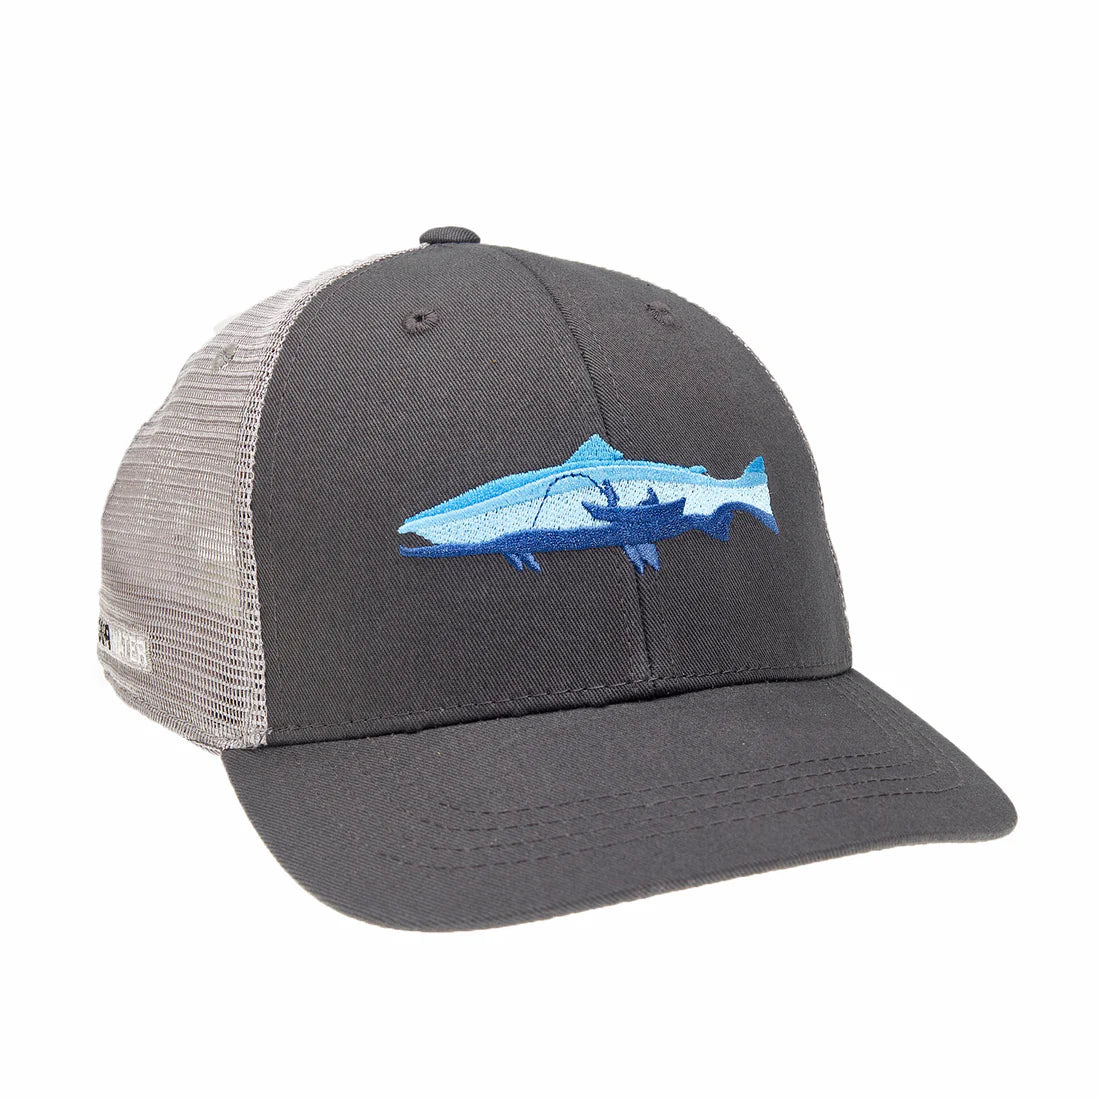 REP YOUR WATER DRIFTER HAT